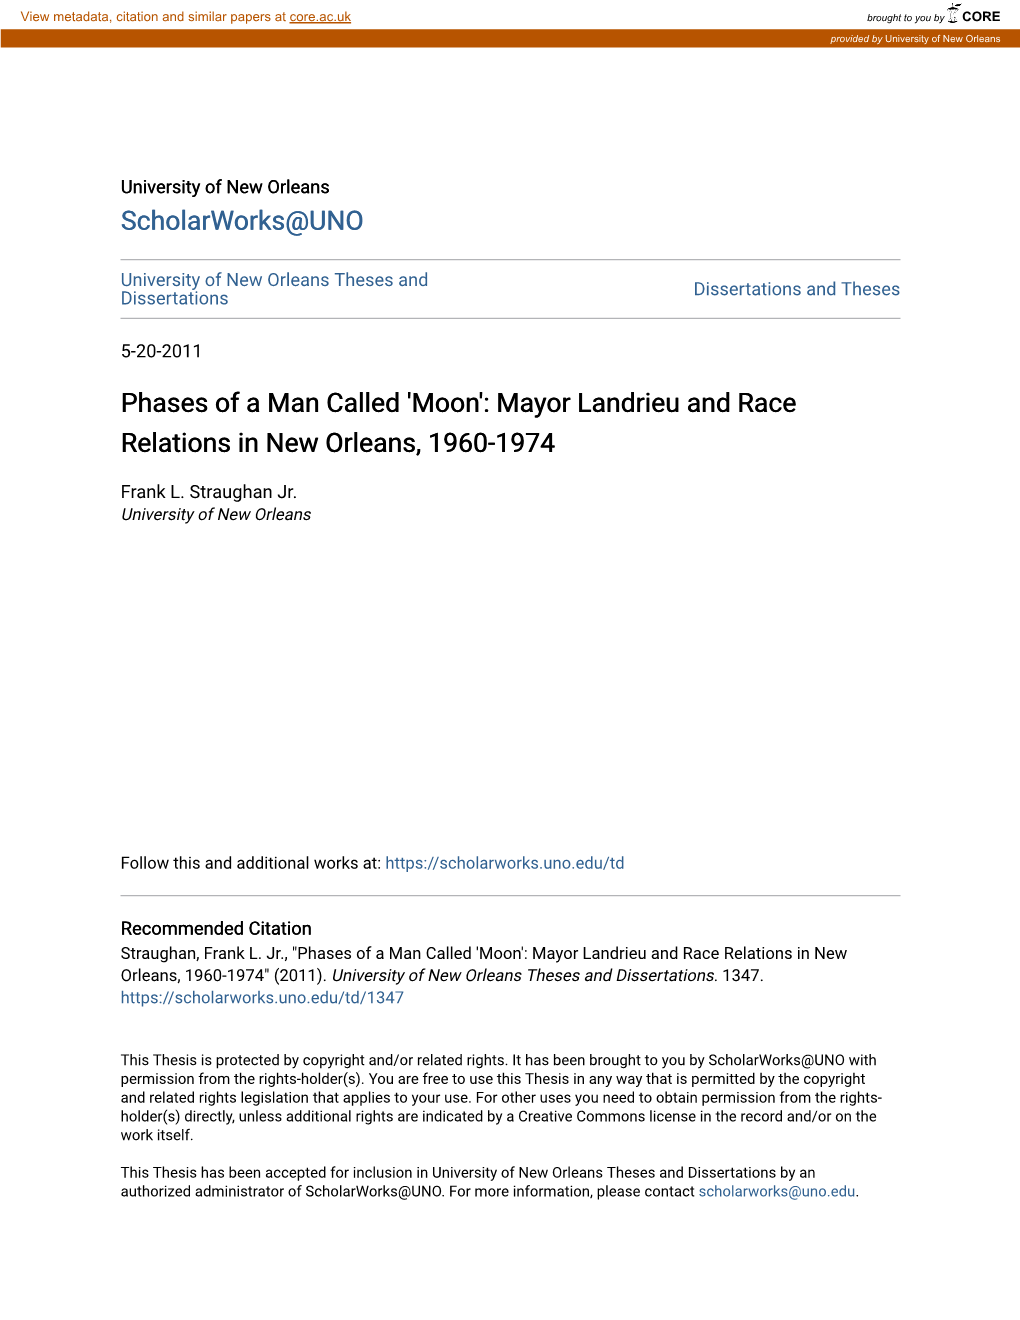 Mayor Landrieu and Race Relations in New Orleans, 1960-1974